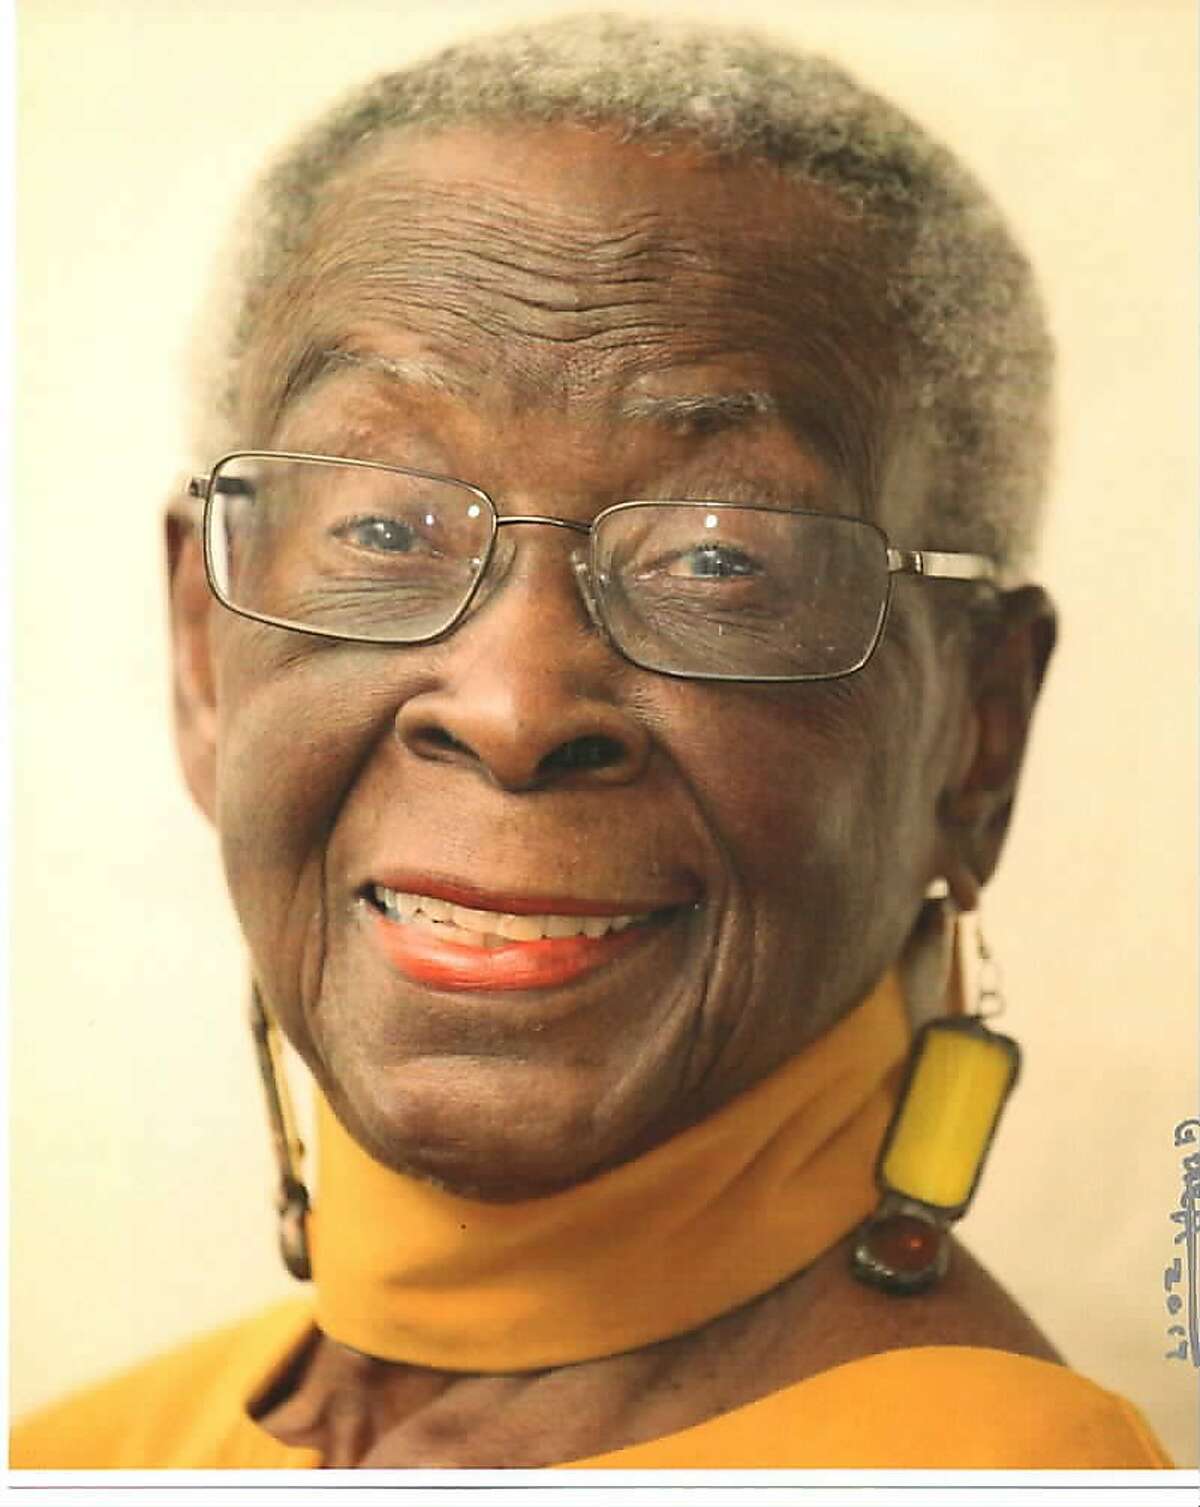 Ruth Beckford, a�longtime�Oakland resident, was a legendary dancer, choreographer and community activist. She died May 8 of natural causes at the age of 93.